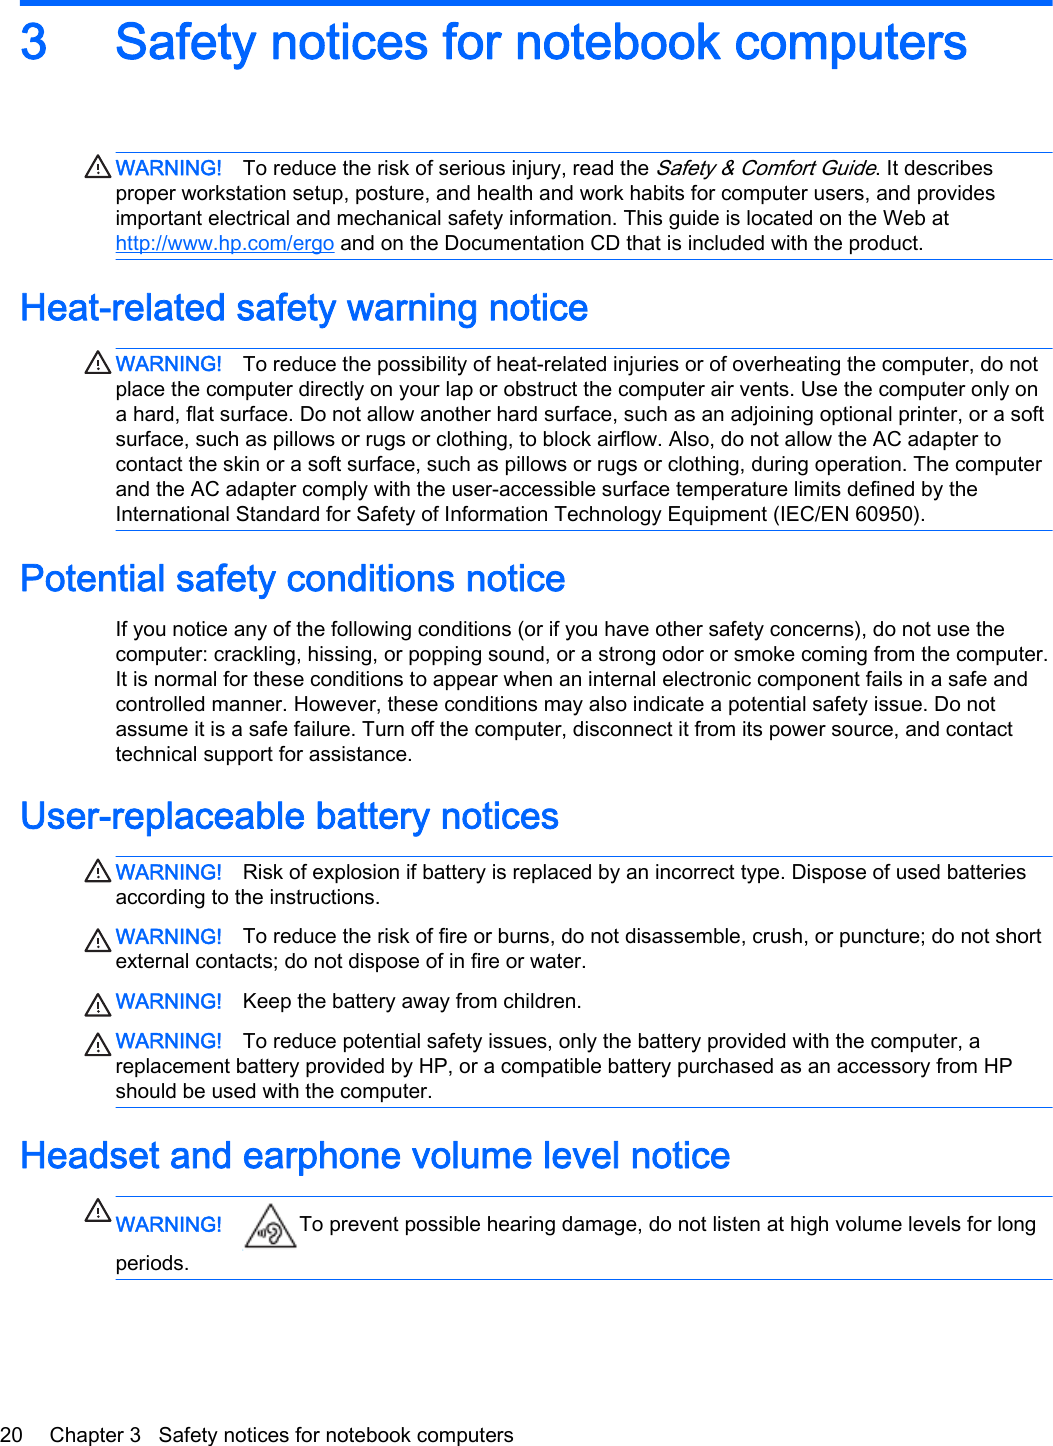 3 Safety notices for notebook computersWARNING! To reduce the risk of serious injury, read the Safety &amp; Comfort Guide. It describesproper workstation setup, posture, and health and work habits for computer users, and providesimportant electrical and mechanical safety information. This guide is located on the Web athttp://www.hp.com/ergo and on the Documentation CD that is included with the product.Heat-related safety warning noticeWARNING! To reduce the possibility of heat-related injuries or of overheating the computer, do notplace the computer directly on your lap or obstruct the computer air vents. Use the computer only ona hard, flat surface. Do not allow another hard surface, such as an adjoining optional printer, or a softsurface, such as pillows or rugs or clothing, to block airflow. Also, do not allow the AC adapter tocontact the skin or a soft surface, such as pillows or rugs or clothing, during operation. The computerand the AC adapter comply with the user-accessible surface temperature limits defined by theInternational Standard for Safety of Information Technology Equipment (IEC/EN 60950).Potential safety conditions noticeIf you notice any of the following conditions (or if you have other safety concerns), do not use thecomputer: crackling, hissing, or popping sound, or a strong odor or smoke coming from the computer.It is normal for these conditions to appear when an internal electronic component fails in a safe andcontrolled manner. However, these conditions may also indicate a potential safety issue. Do notassume it is a safe failure. Turn off the computer, disconnect it from its power source, and contacttechnical support for assistance.User-replaceable battery noticesWARNING! Risk of explosion if battery is replaced by an incorrect type. Dispose of used batteriesaccording to the instructions.WARNING! To reduce the risk of fire or burns, do not disassemble, crush, or puncture; do not shortexternal contacts; do not dispose of in fire or water.WARNING! Keep the battery away from children.WARNING! To reduce potential safety issues, only the battery provided with the computer, areplacement battery provided by HP, or a compatible battery purchased as an accessory from HPshould be used with the computer.Headset and earphone volume level noticeWARNING! To prevent possible hearing damage, do not listen at high volume levels for longperiods.20 Chapter 3   Safety notices for notebook computers